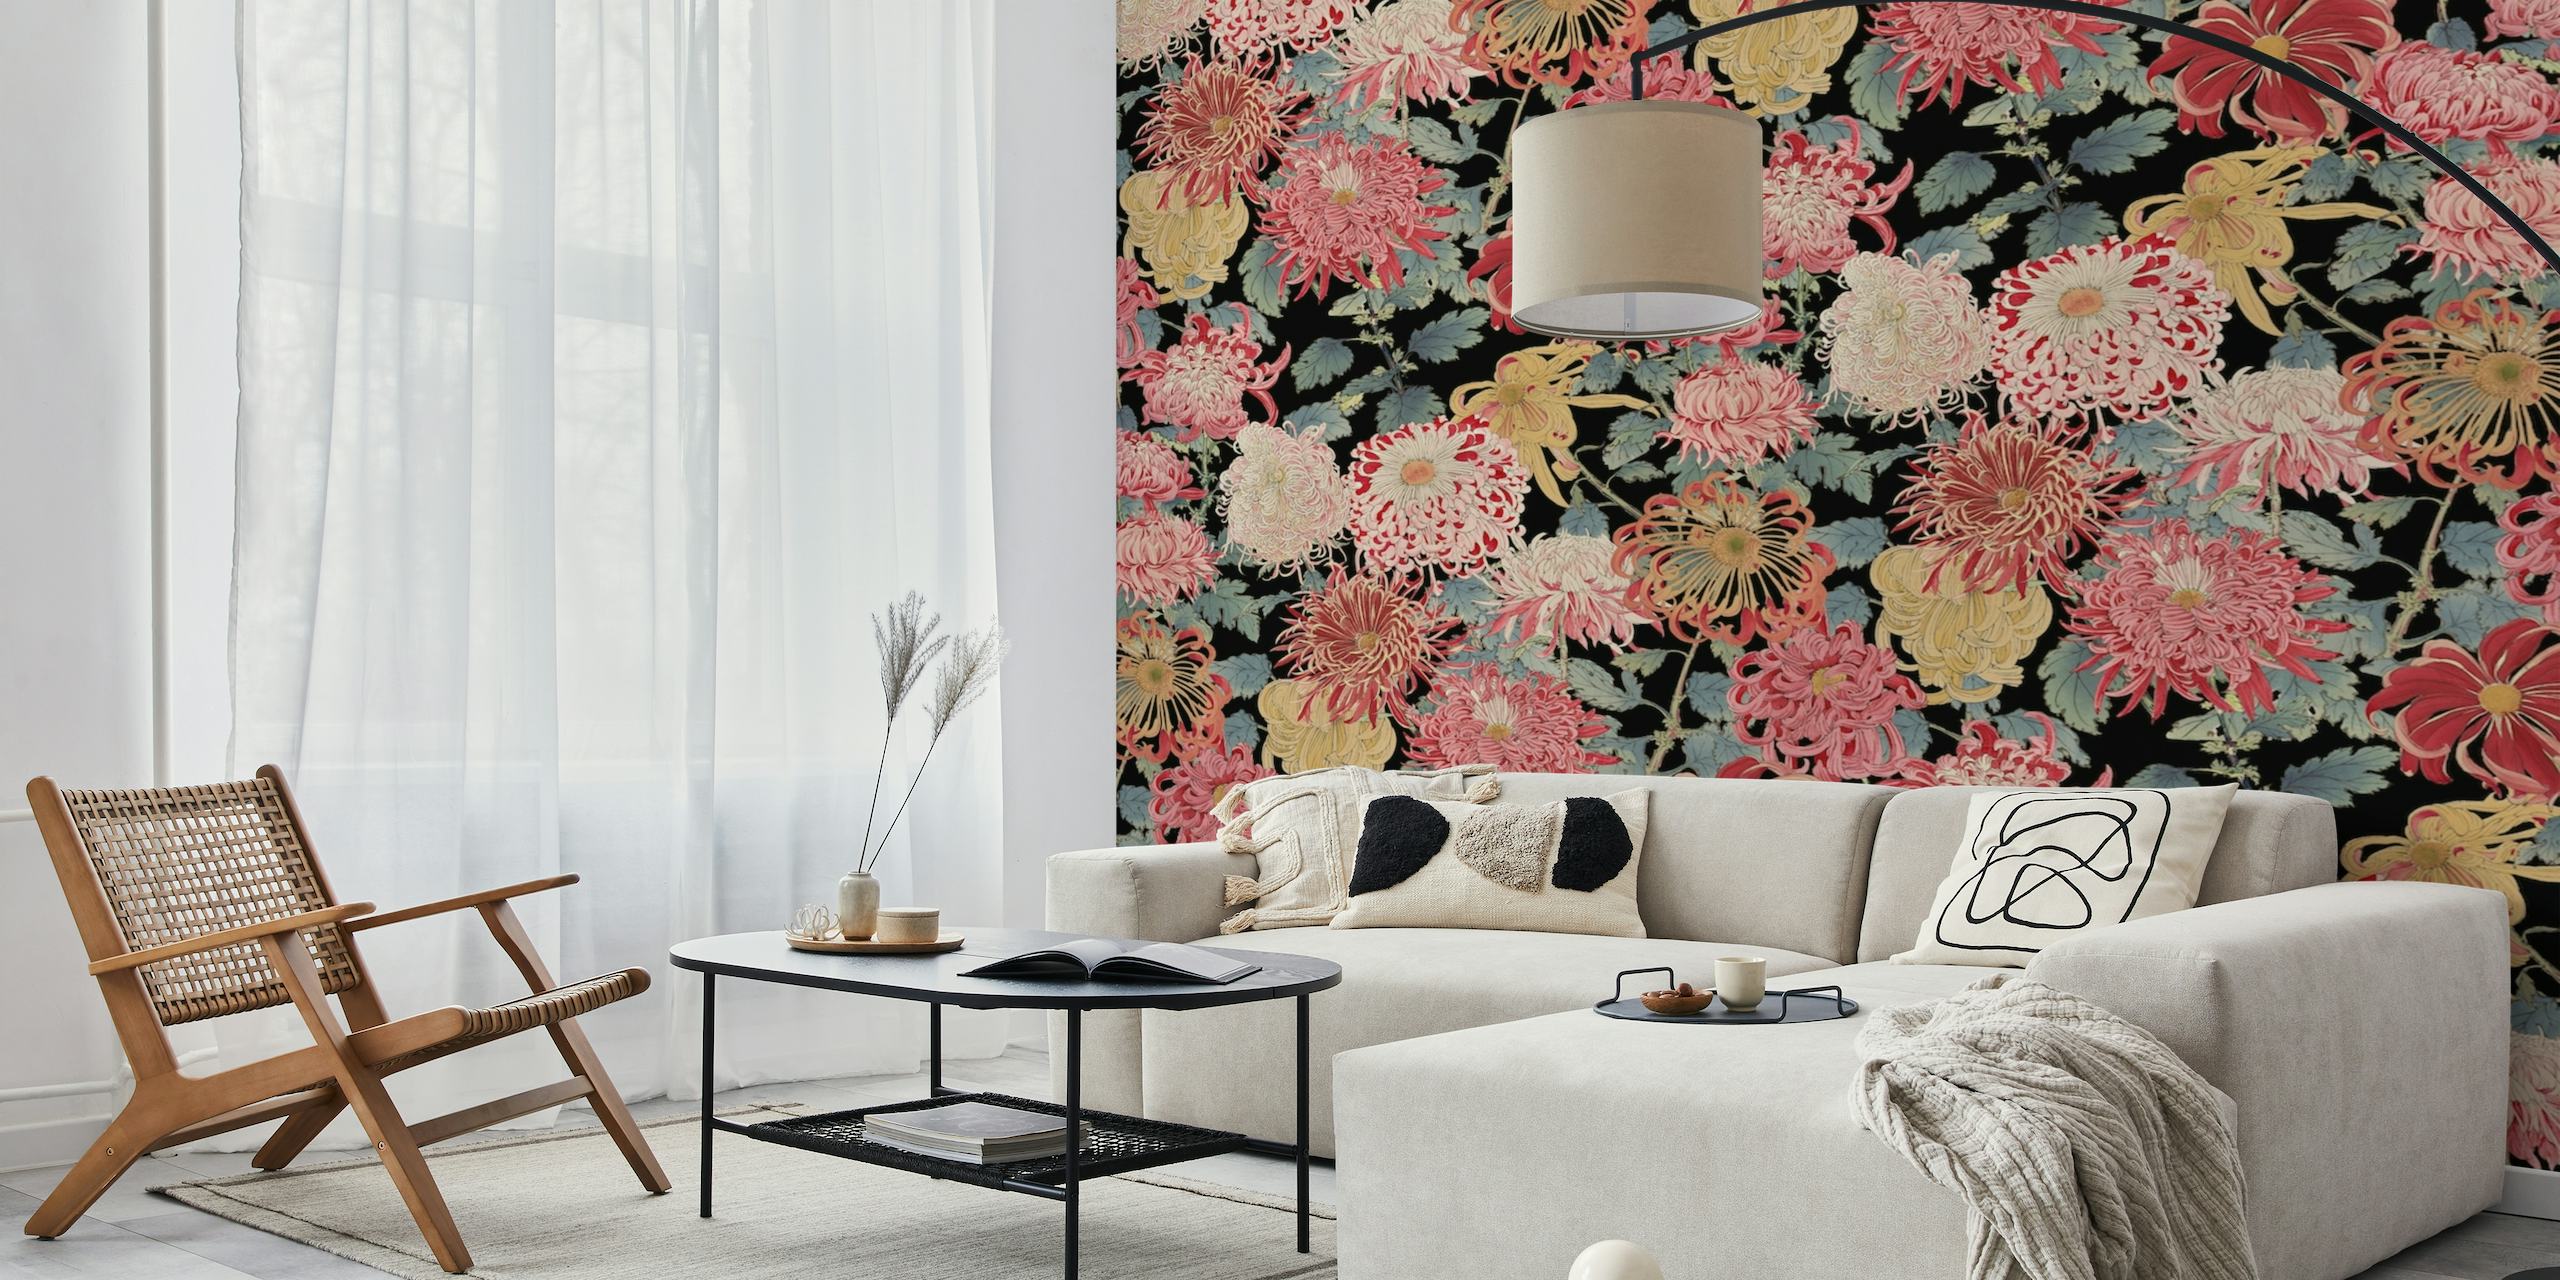 Oriental style floral wall mural with rich pink, gold, and green flowers on a dark background